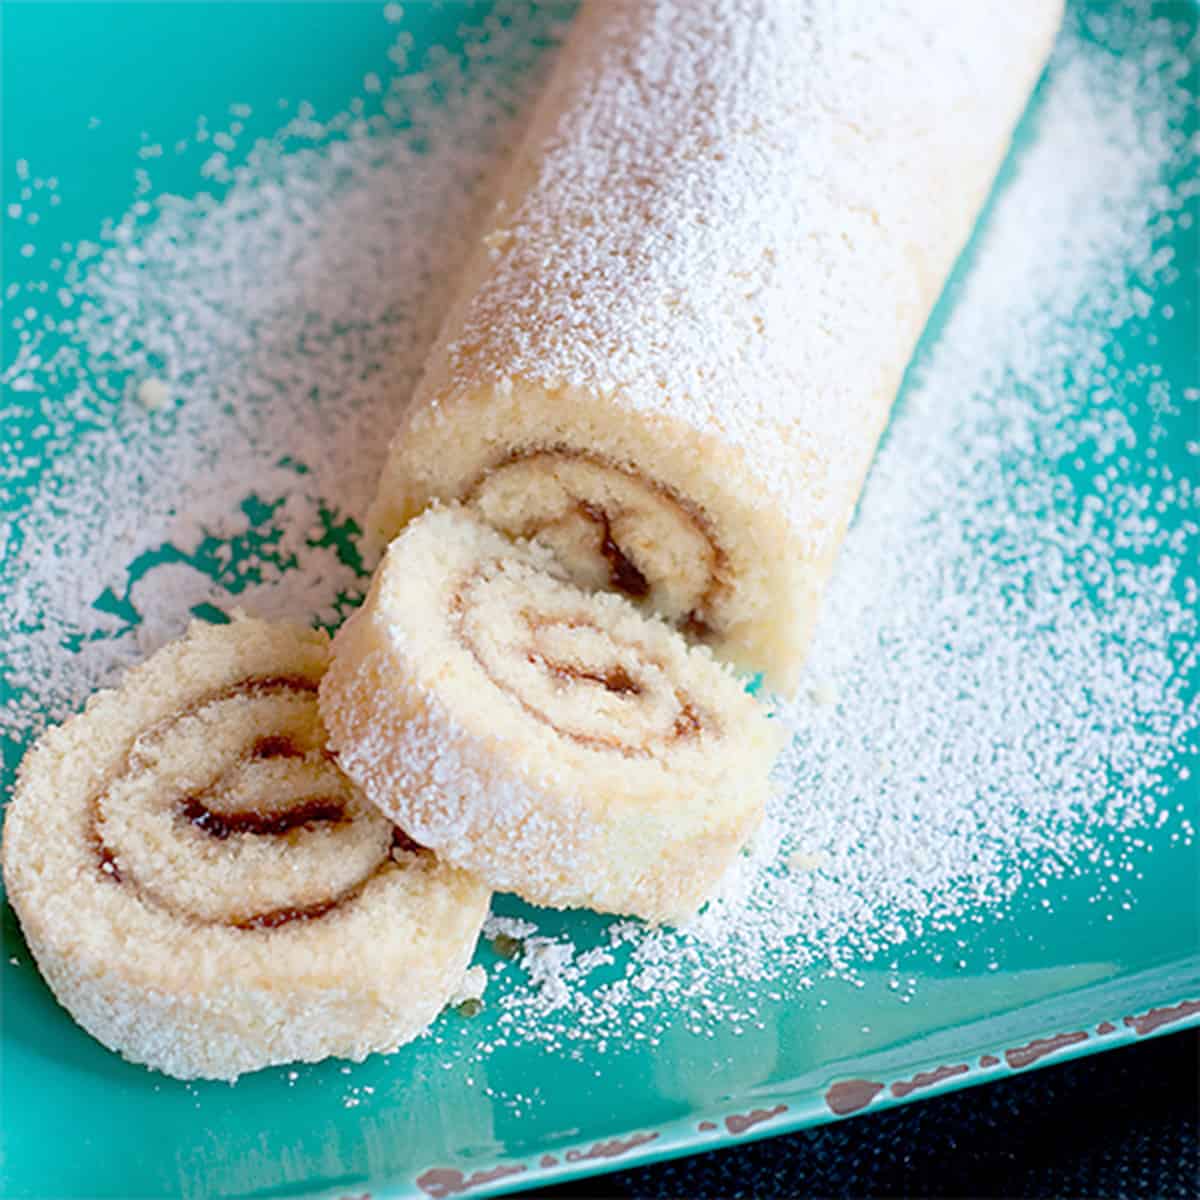 Finished raspberry jelly roll dusted with powdered sugar.